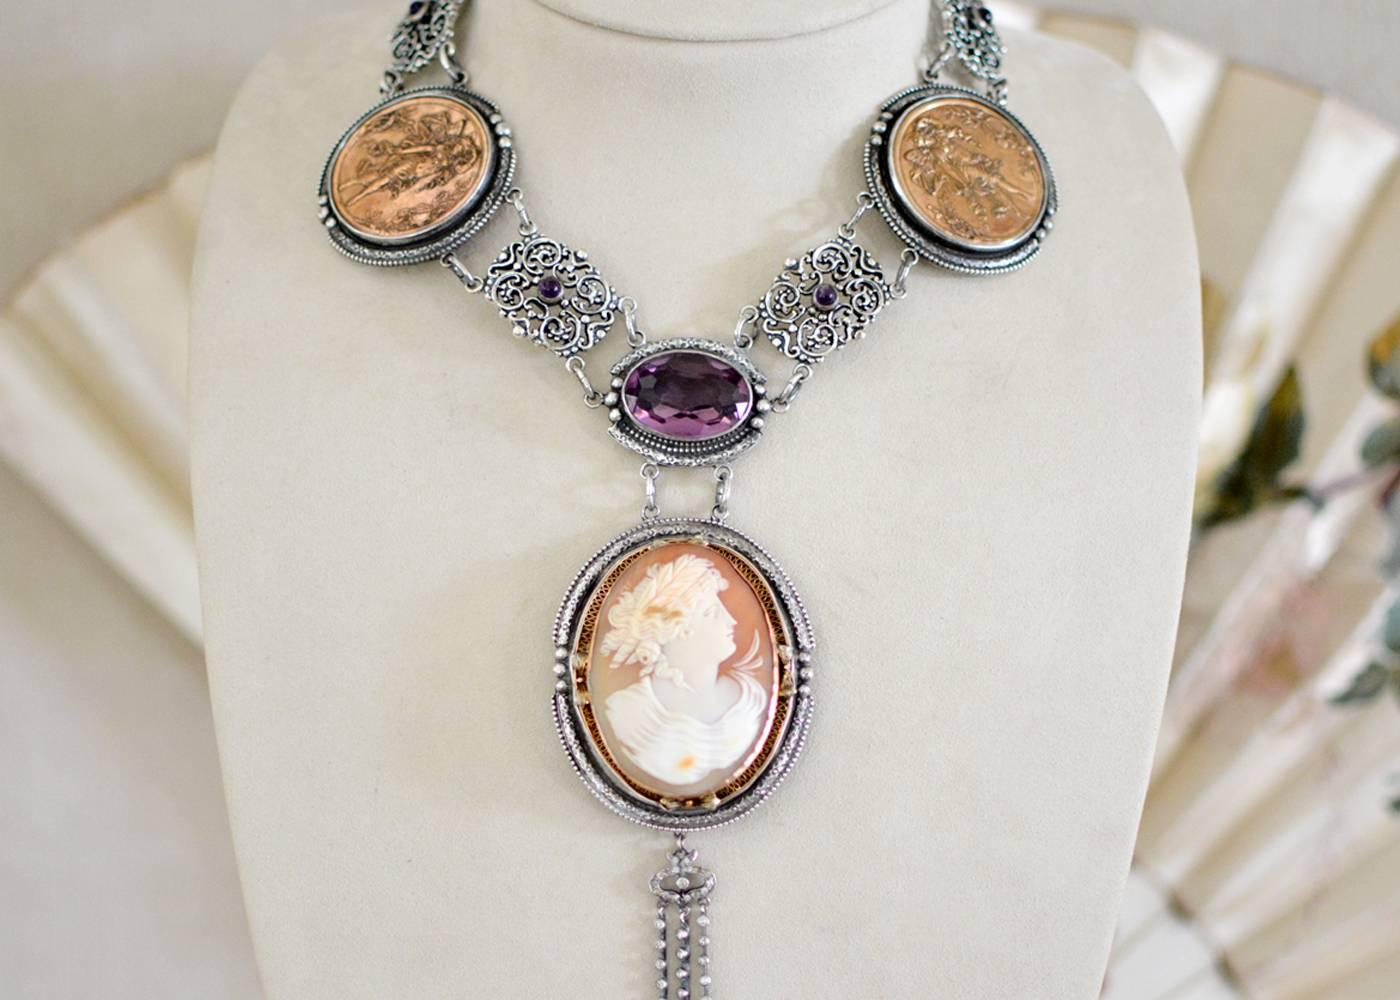 An old cut, 46 carat natural Amethyst set within an elongated oval frame holds a very finely carved mid nineteenth century cameo depicting a Greek Goddess. The original delicate filigree frame of 14 karat gold is mounted within engraved sterling